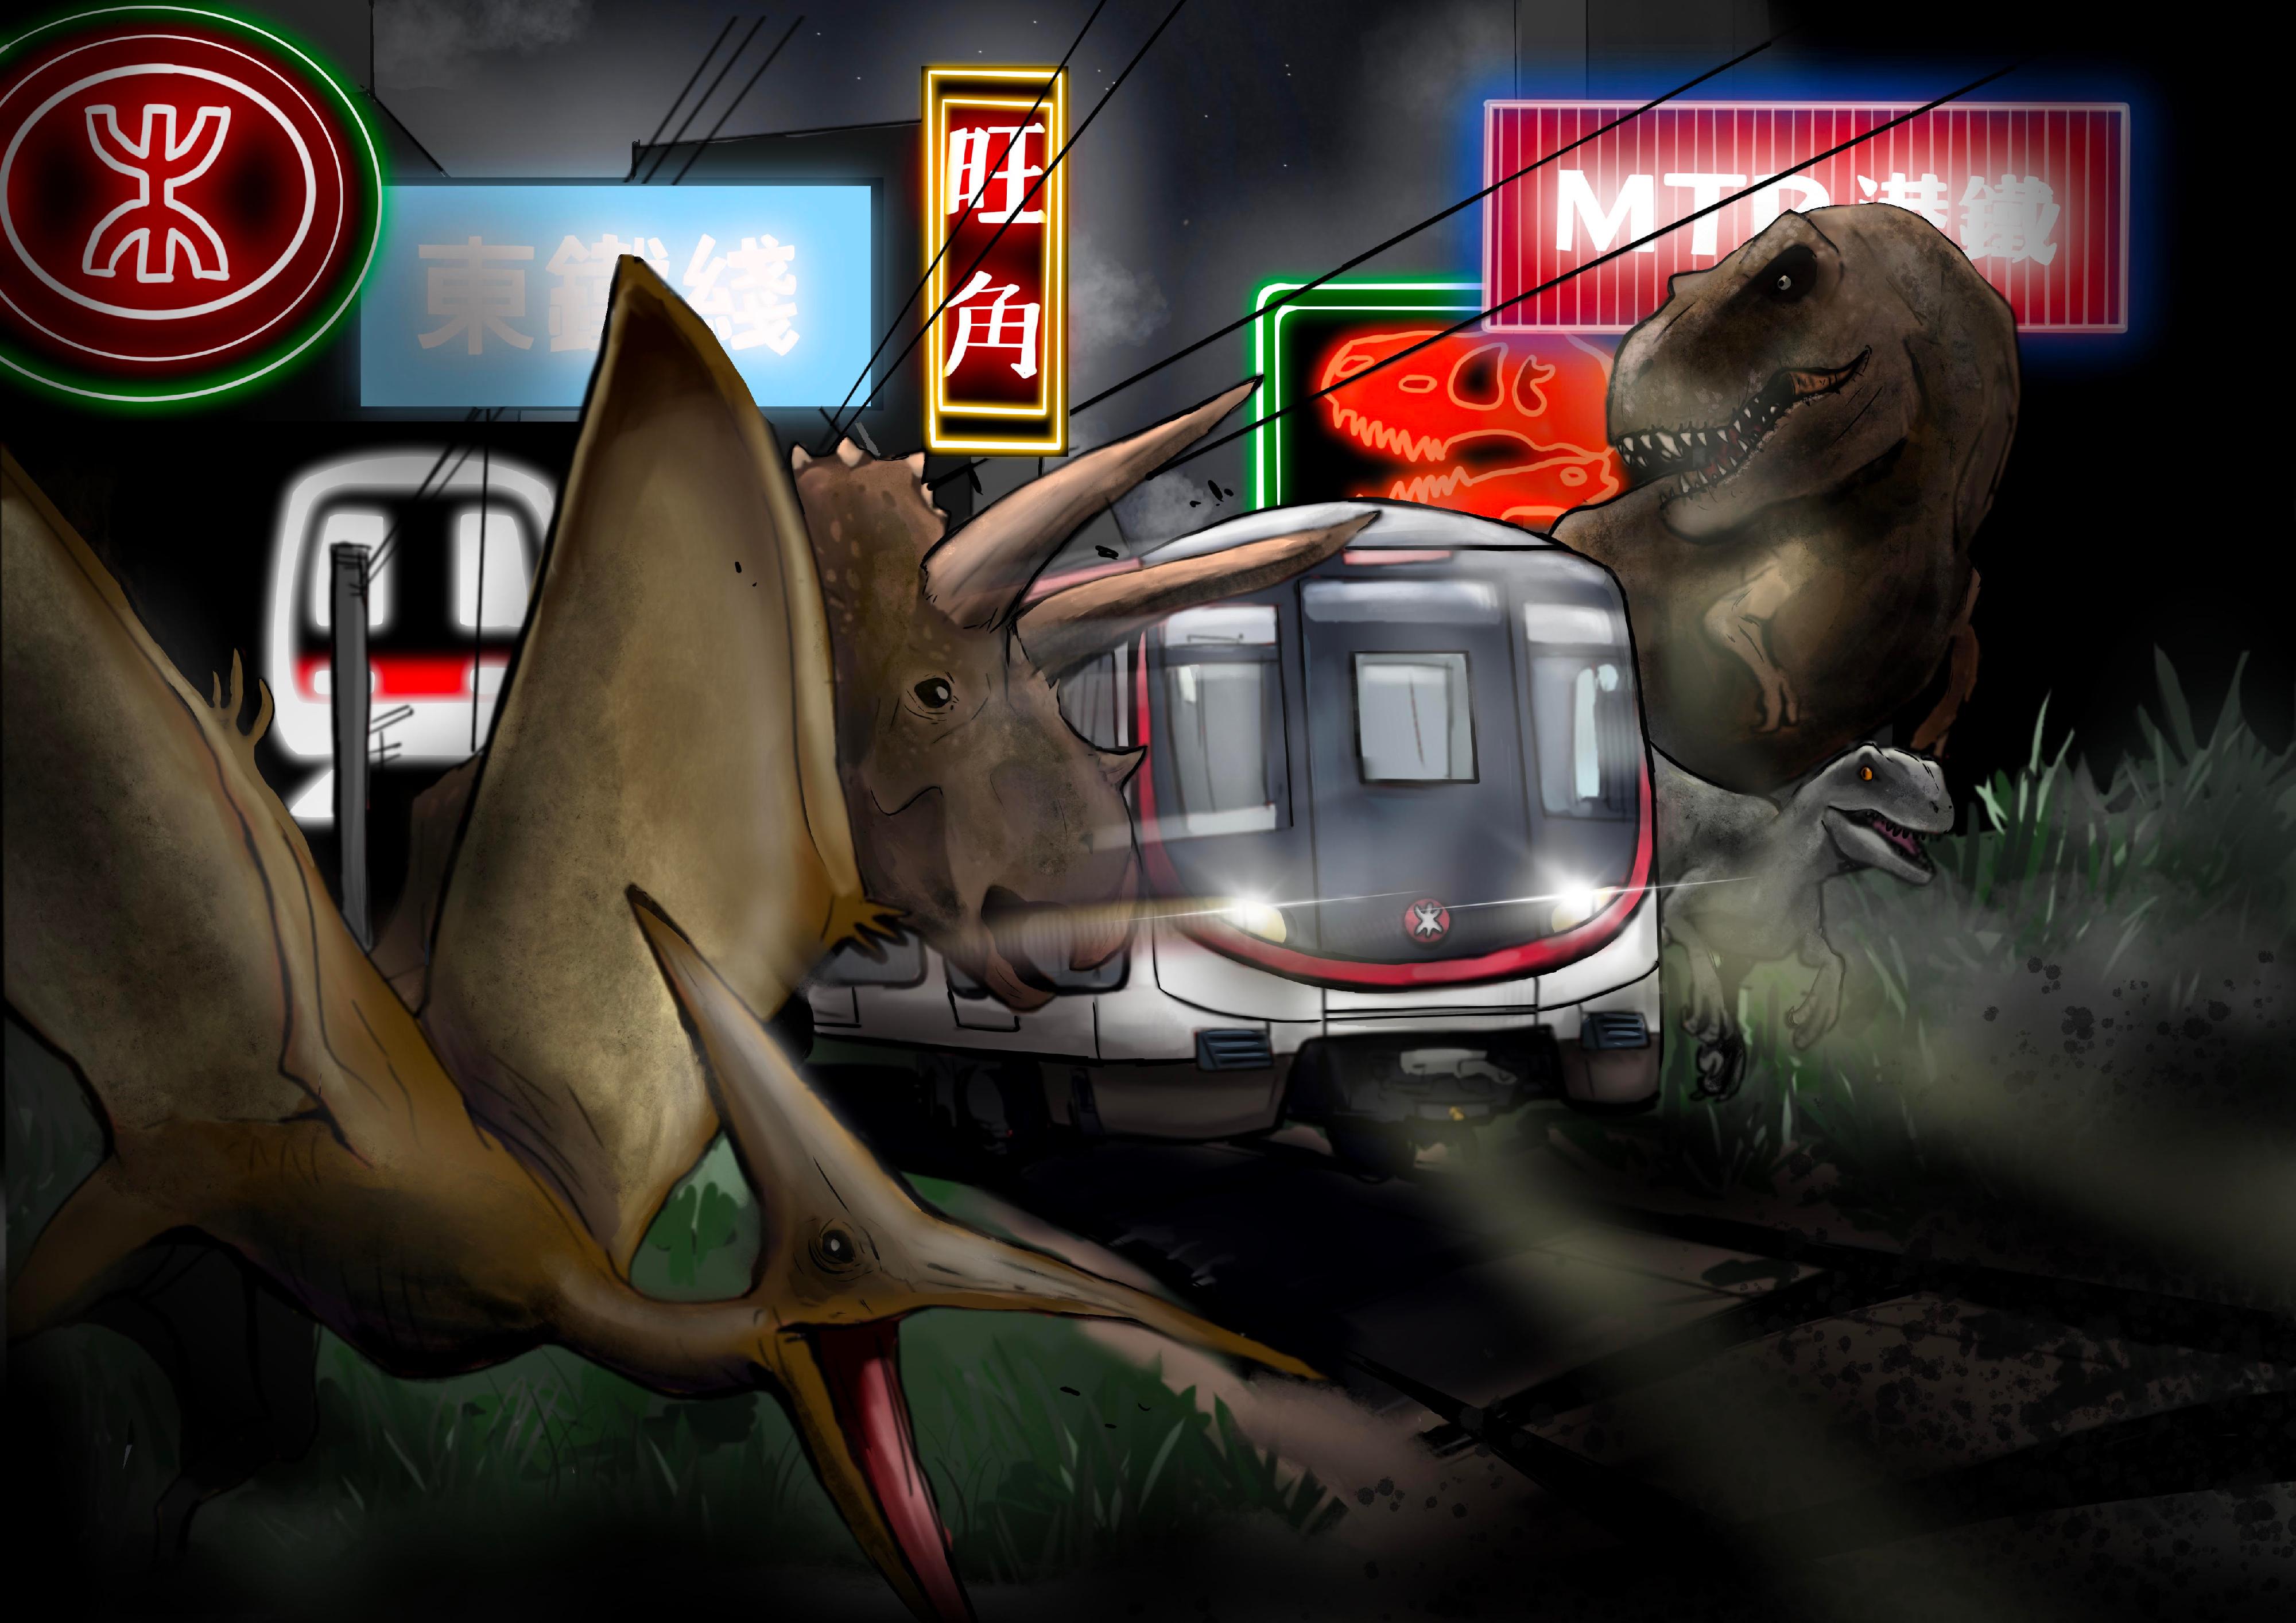 The winning entries of the "MTR x Dinosaur Adventure Art Competition 2022" will be displayed at the Hong Kong Science Museum from August 12 (Friday). Picture shows the artwork of Chan Man-hin from Jockey Club Ti-I College, the champion of the Senior Secondary Level under the Digital Graphics Category of the competition.